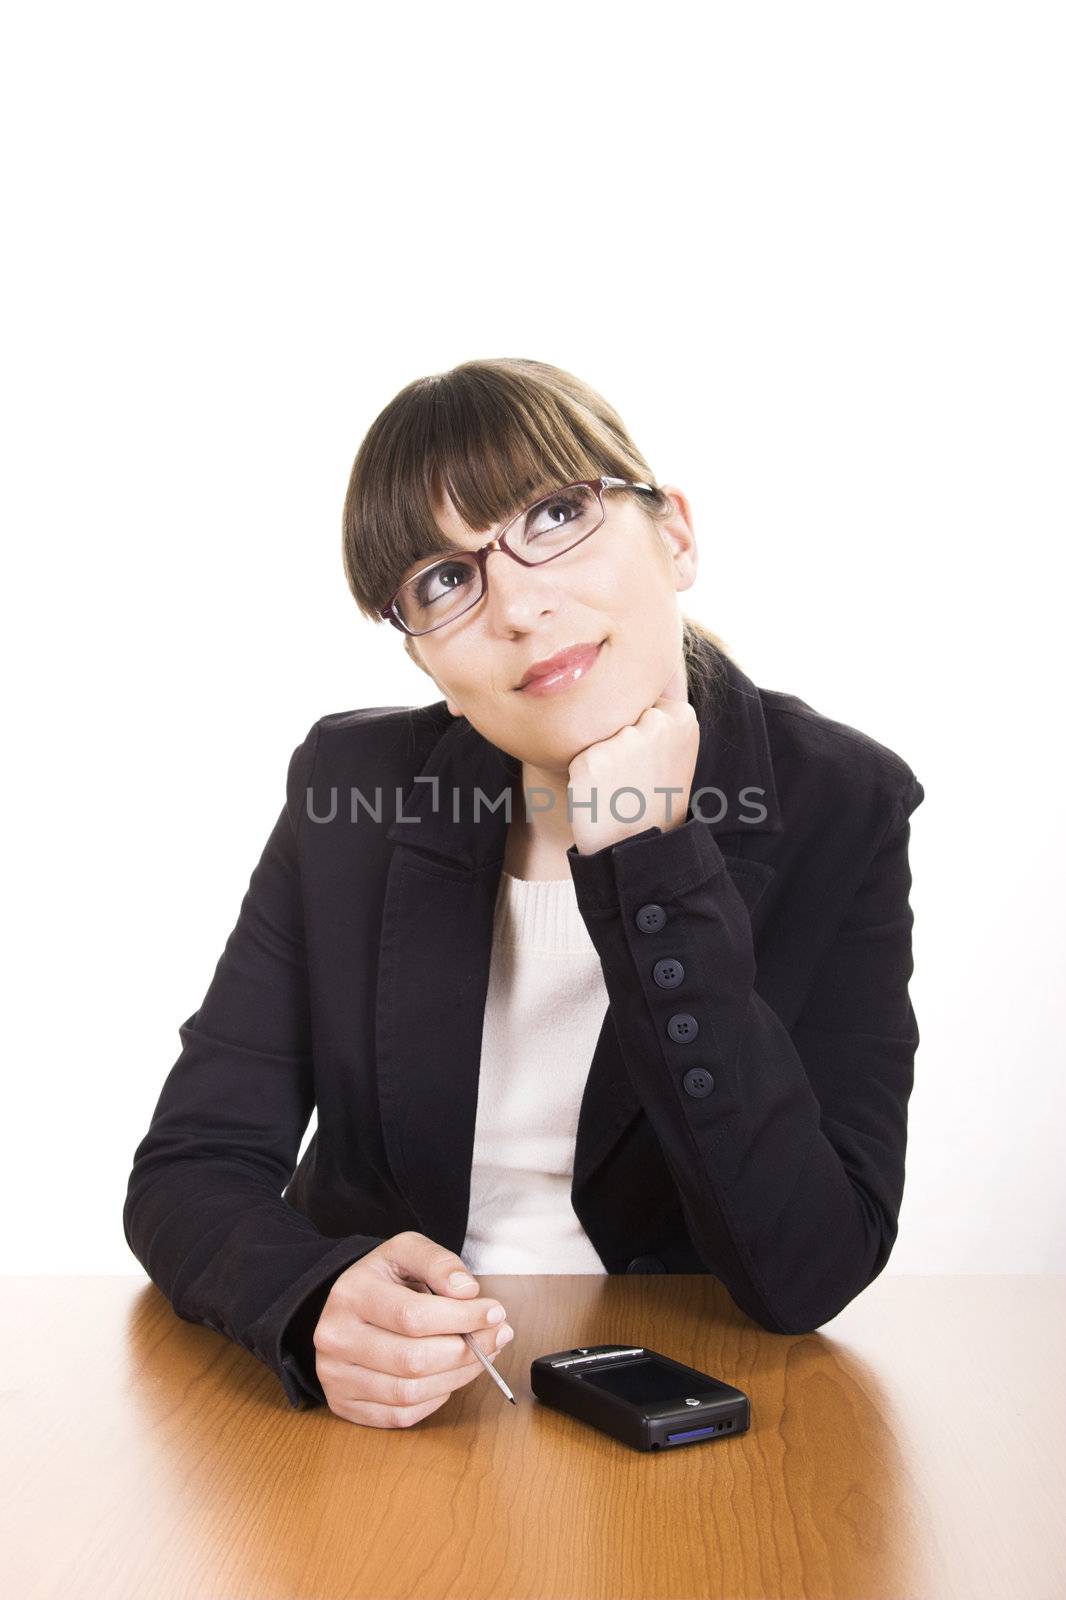 Beautiful business woman with a Pda over a white background